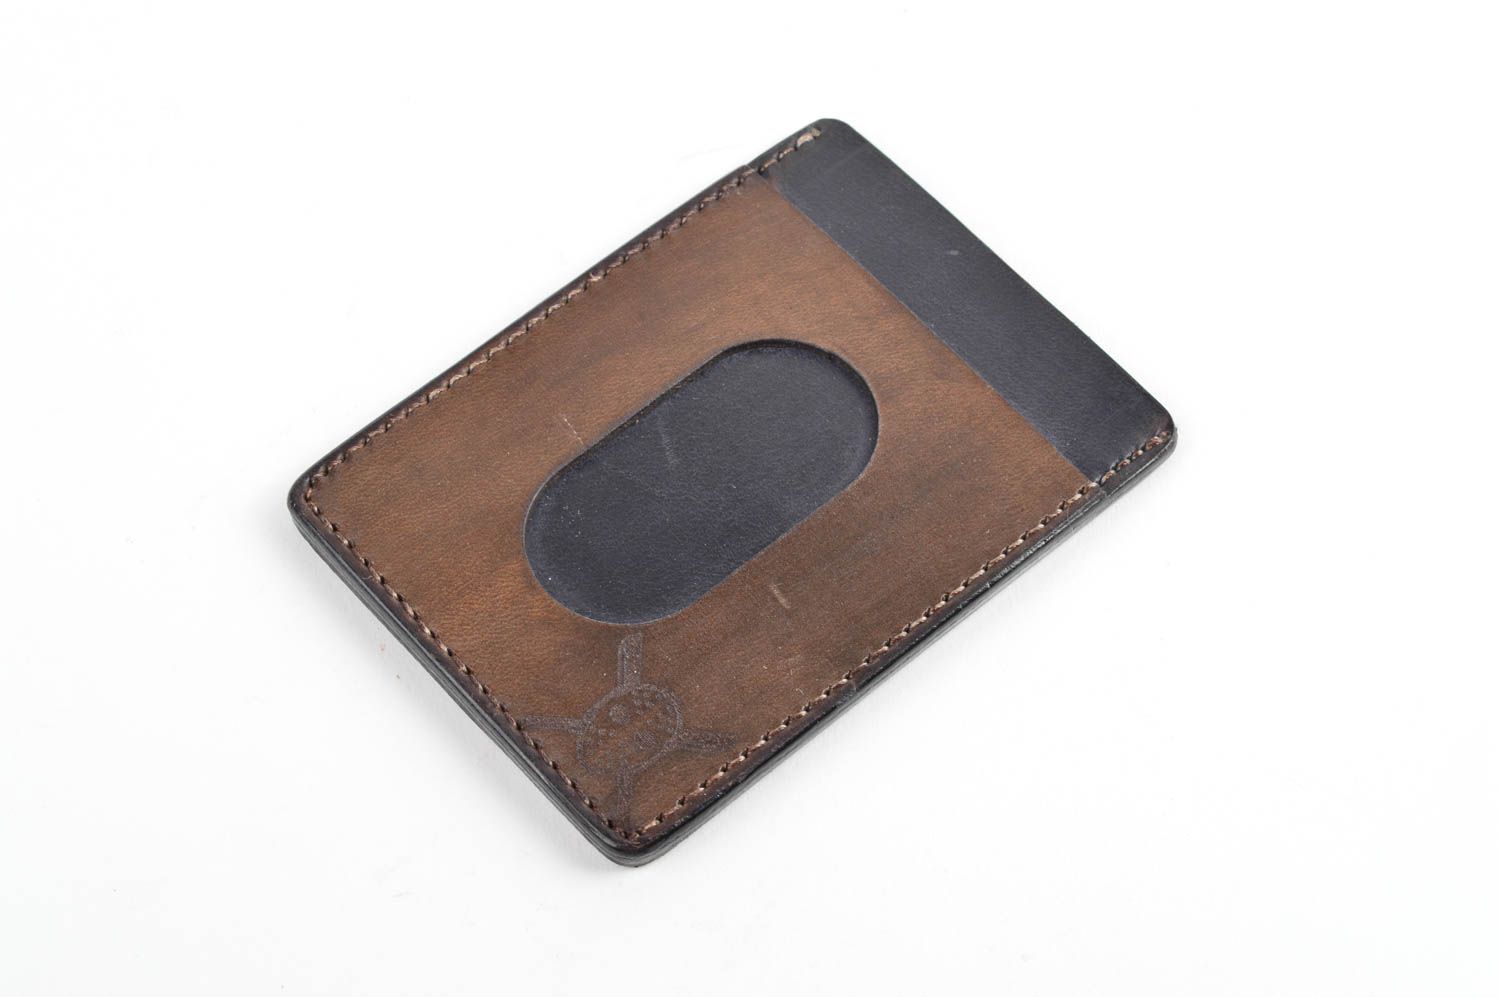 Handmade card case leather goods credit card holder leather wallet unique gifts photo 2